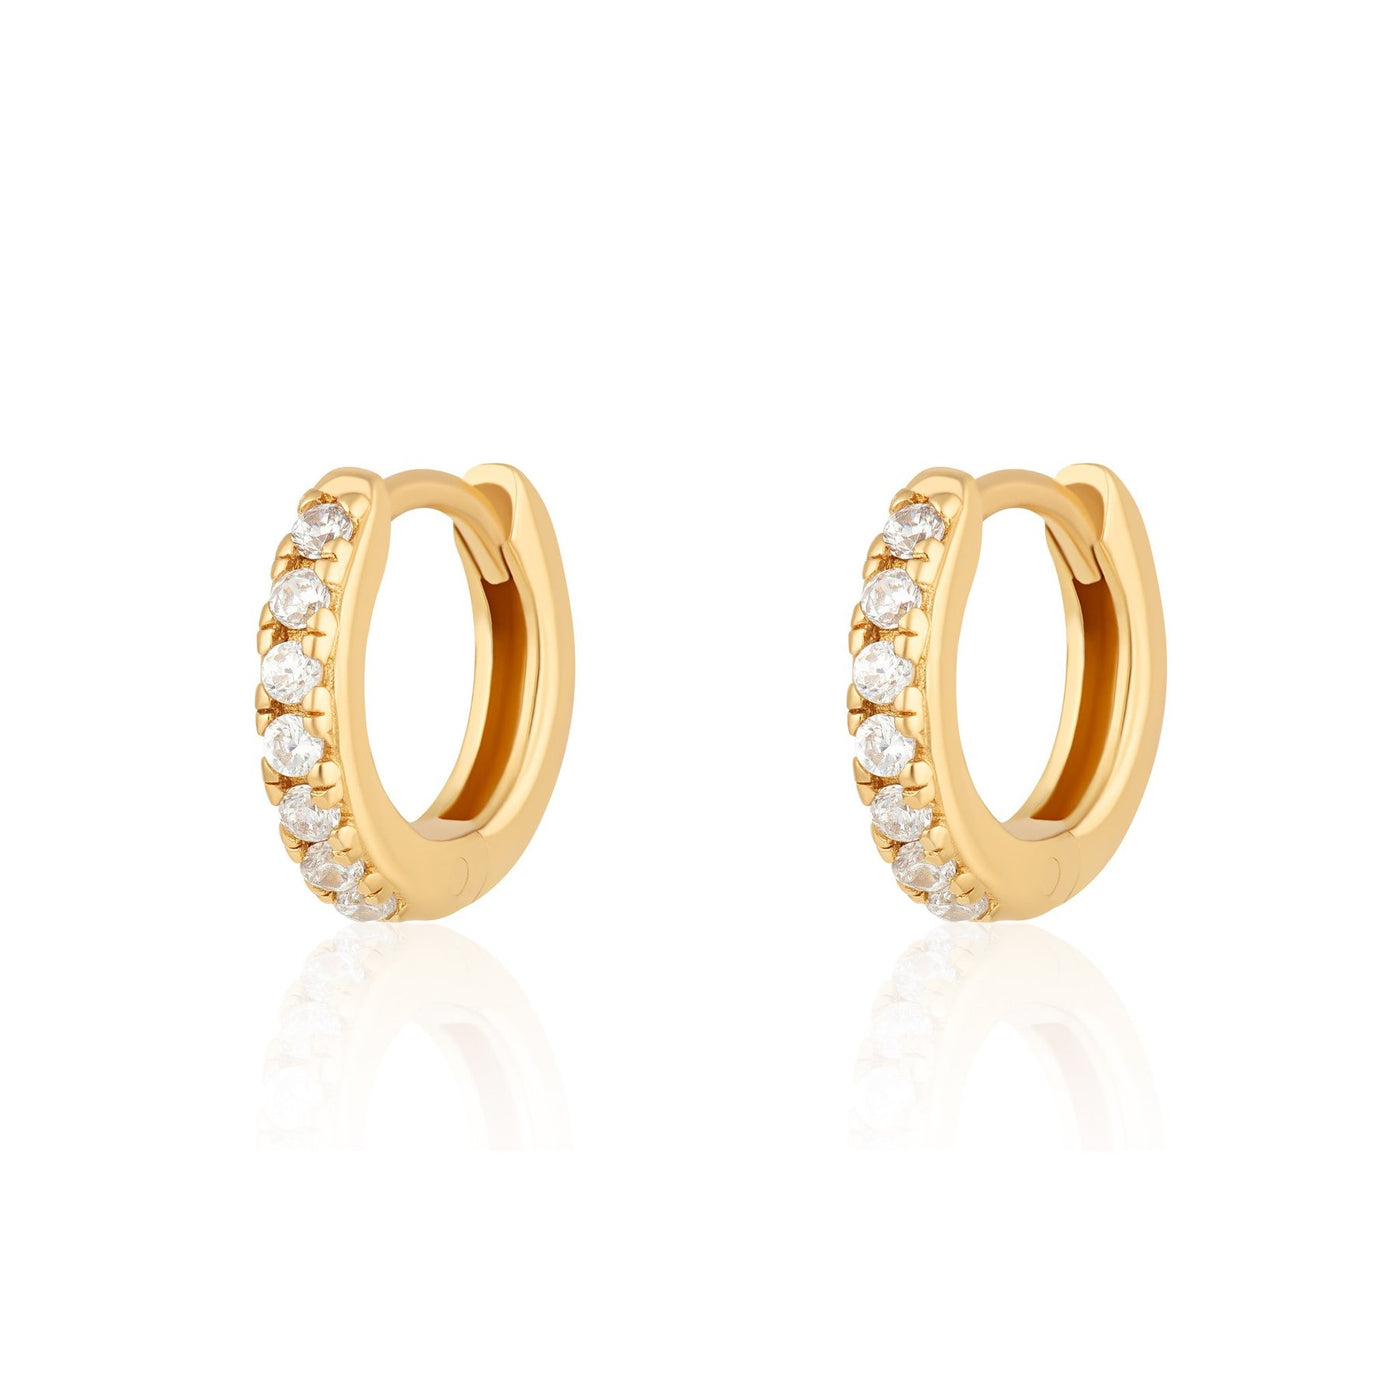 Huggie Earrings with Clear Stones in Gold Plated Silver